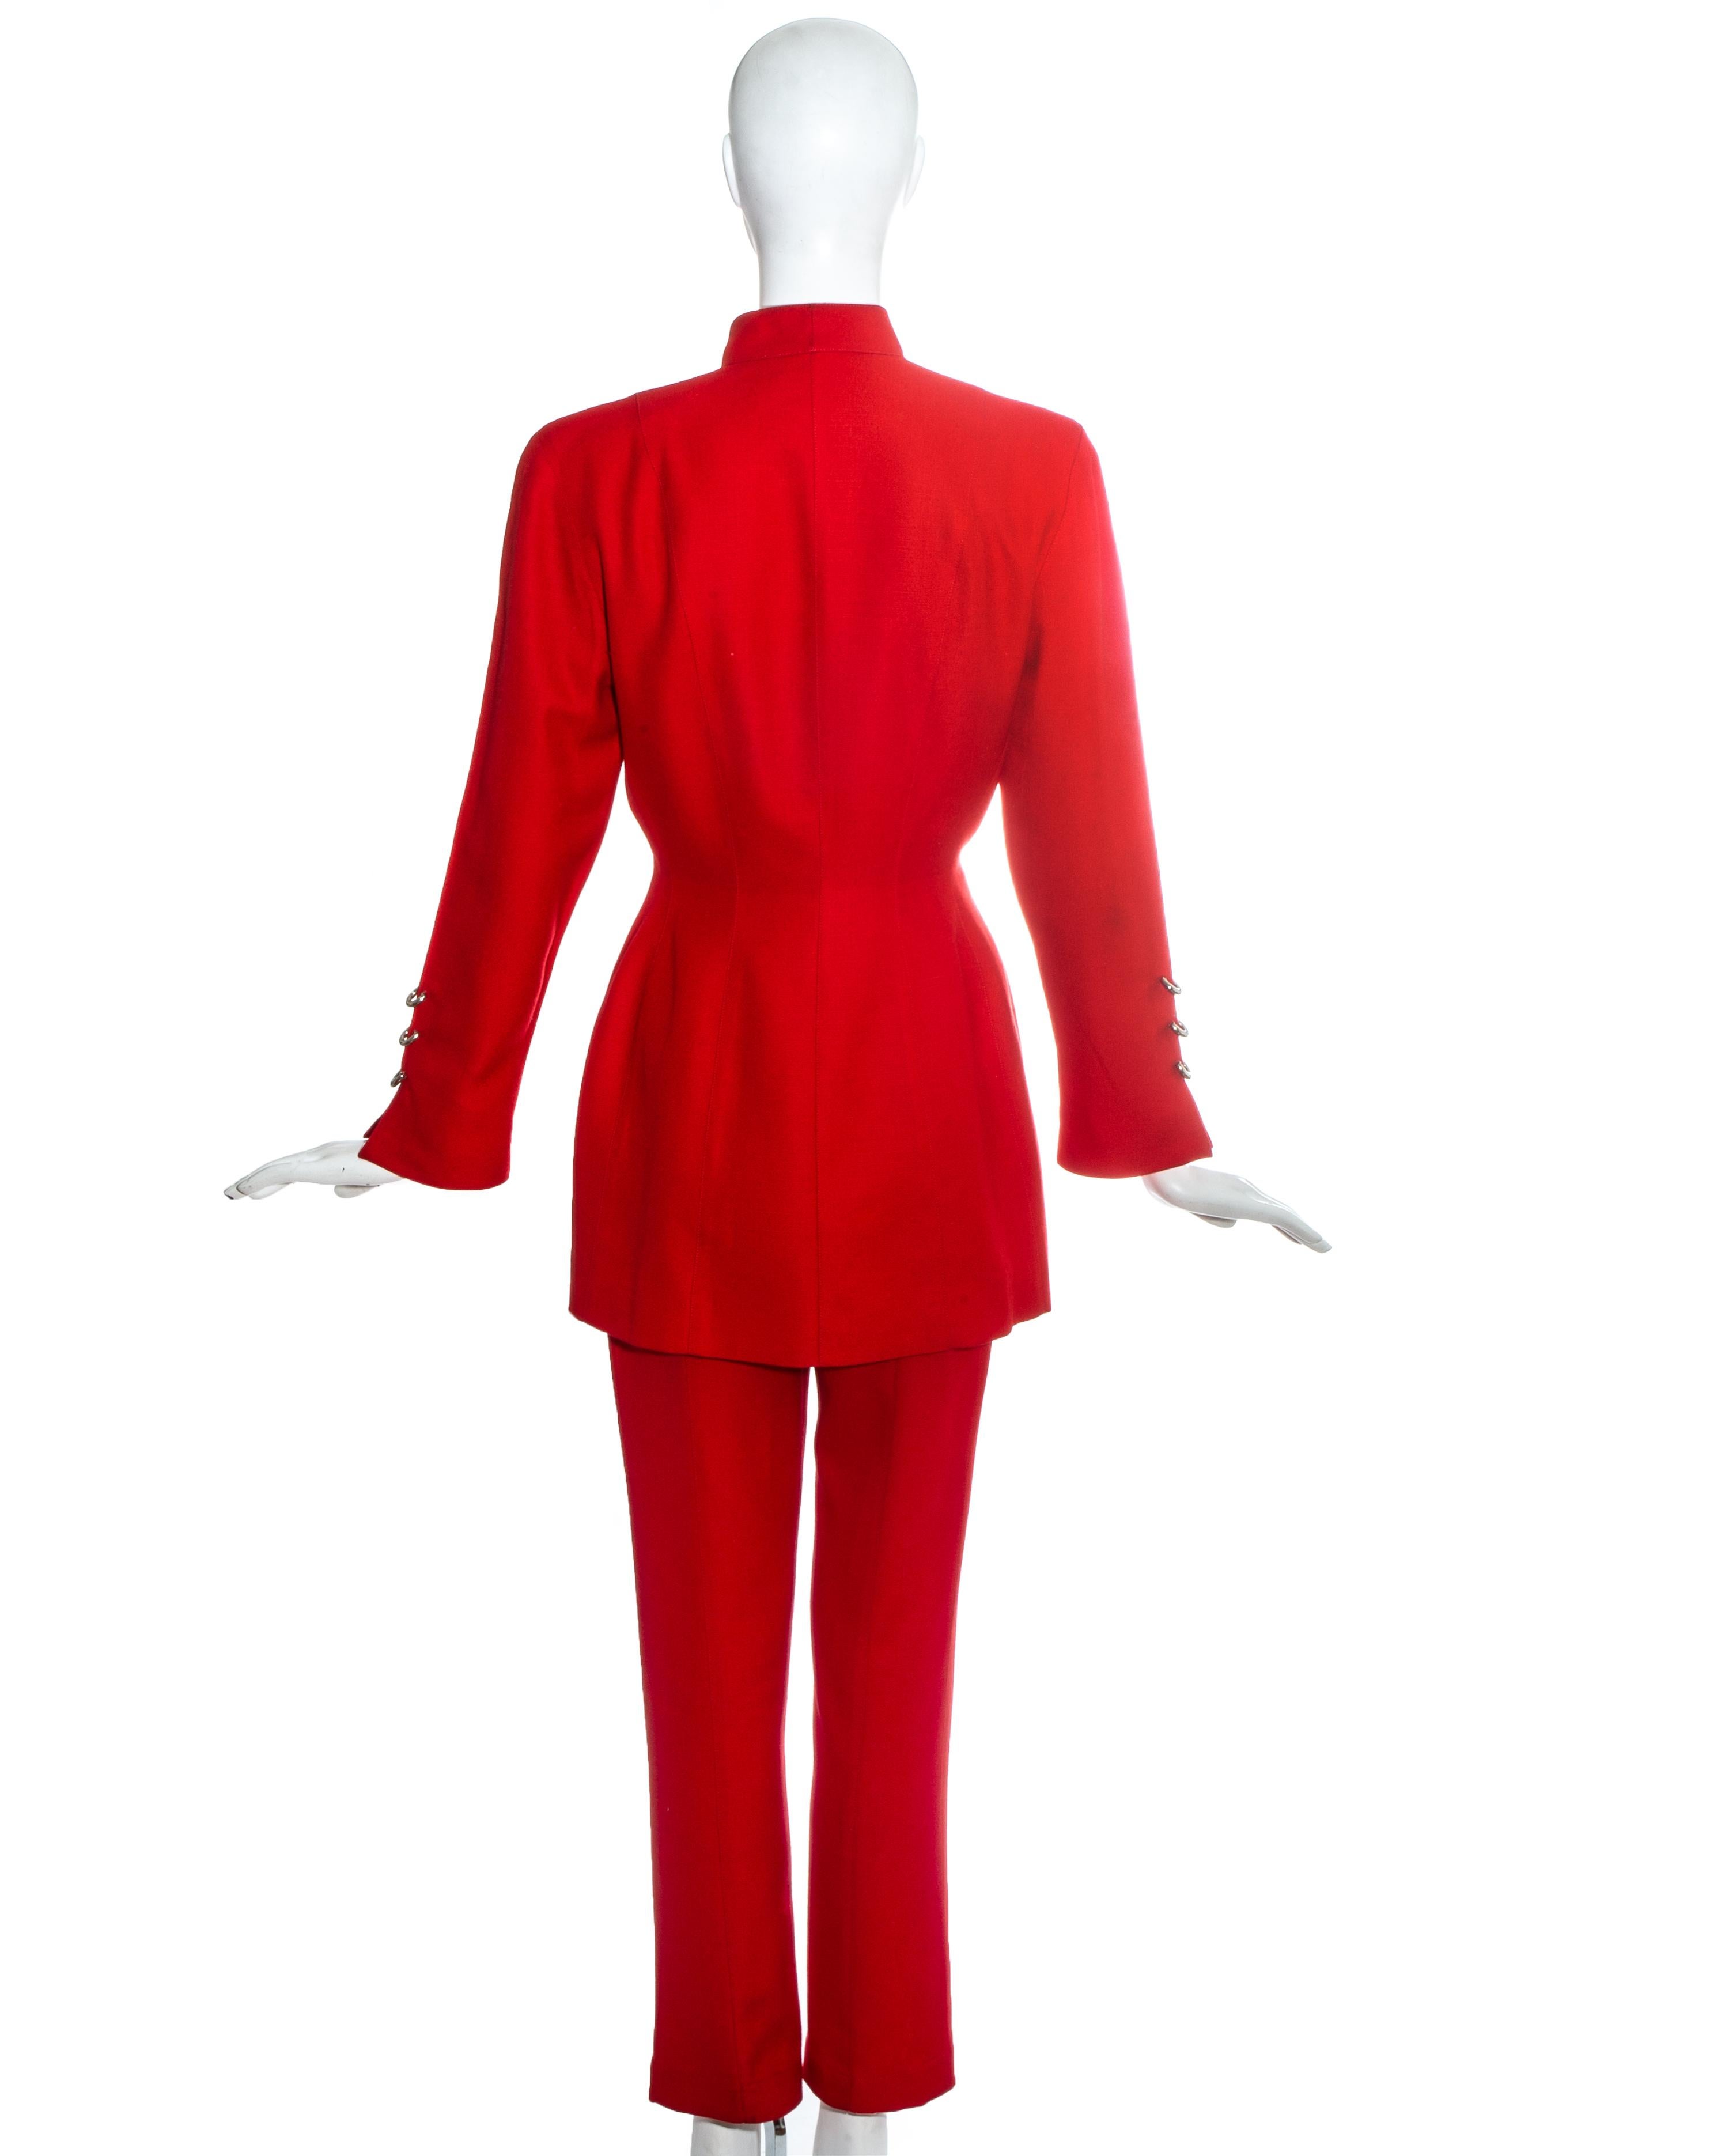 Women's Thierry Mugler red pant suit with silver metal rings, c. 1990s For Sale